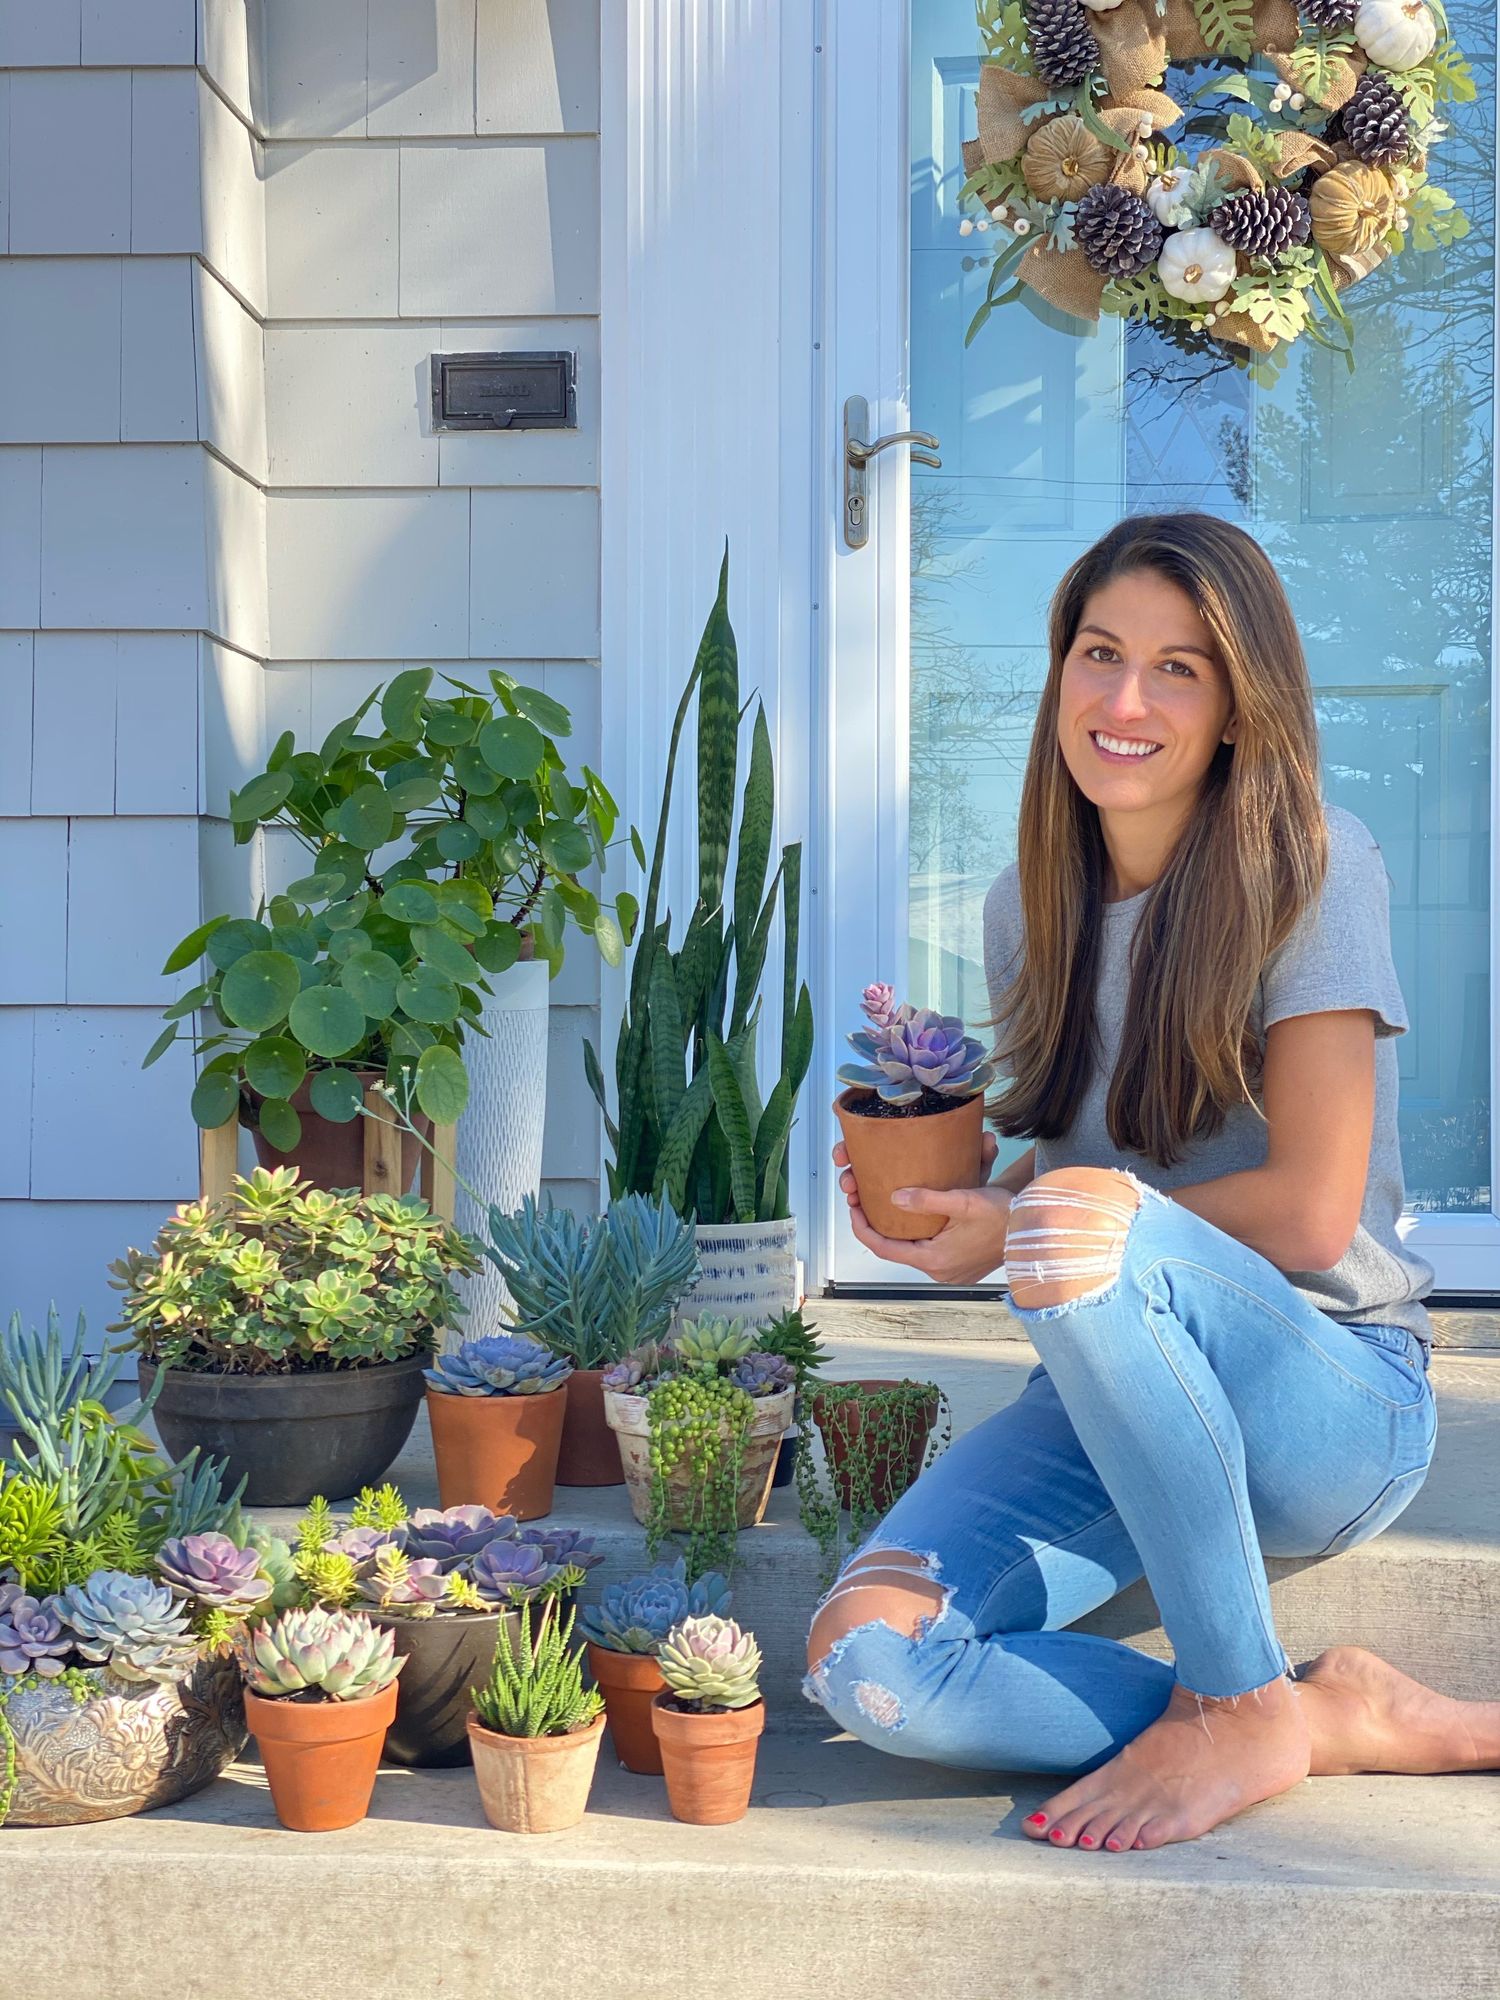 Connie Gliadon turned her succulent hobby into a side hustle.